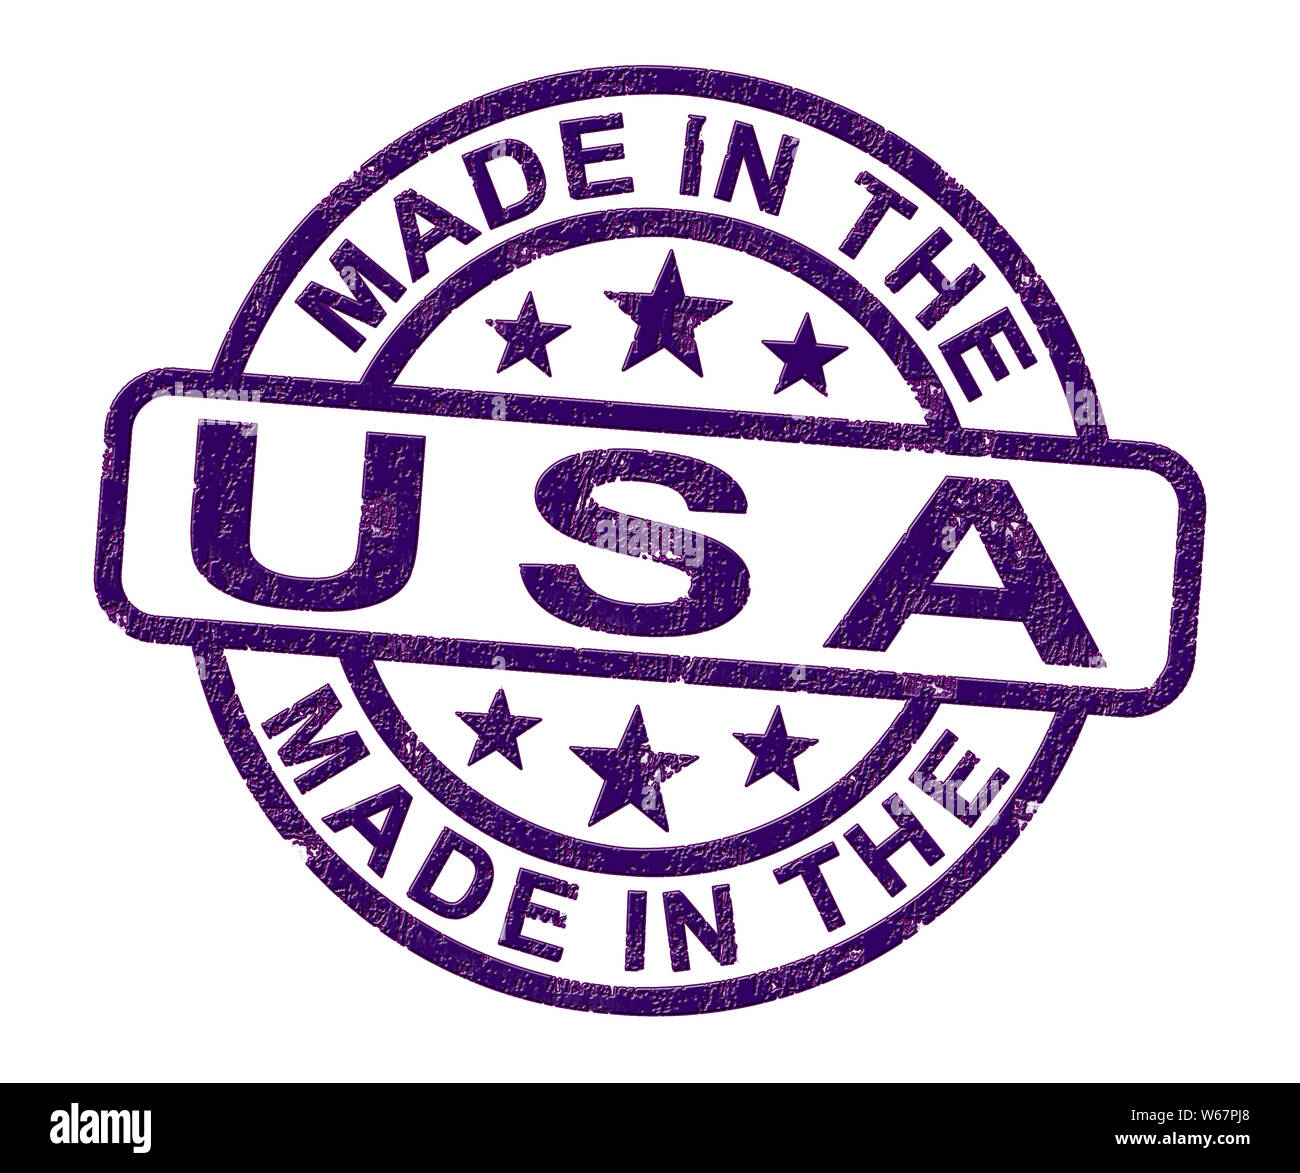 https://c8.alamy.com/comp/W67PJ8/made-in-the-usa-stamp-shows-american-products-produced-or-fabricated-in-america-quality-patriotic-exports-for-international-trade-3d-illustration-W67PJ8.jpg